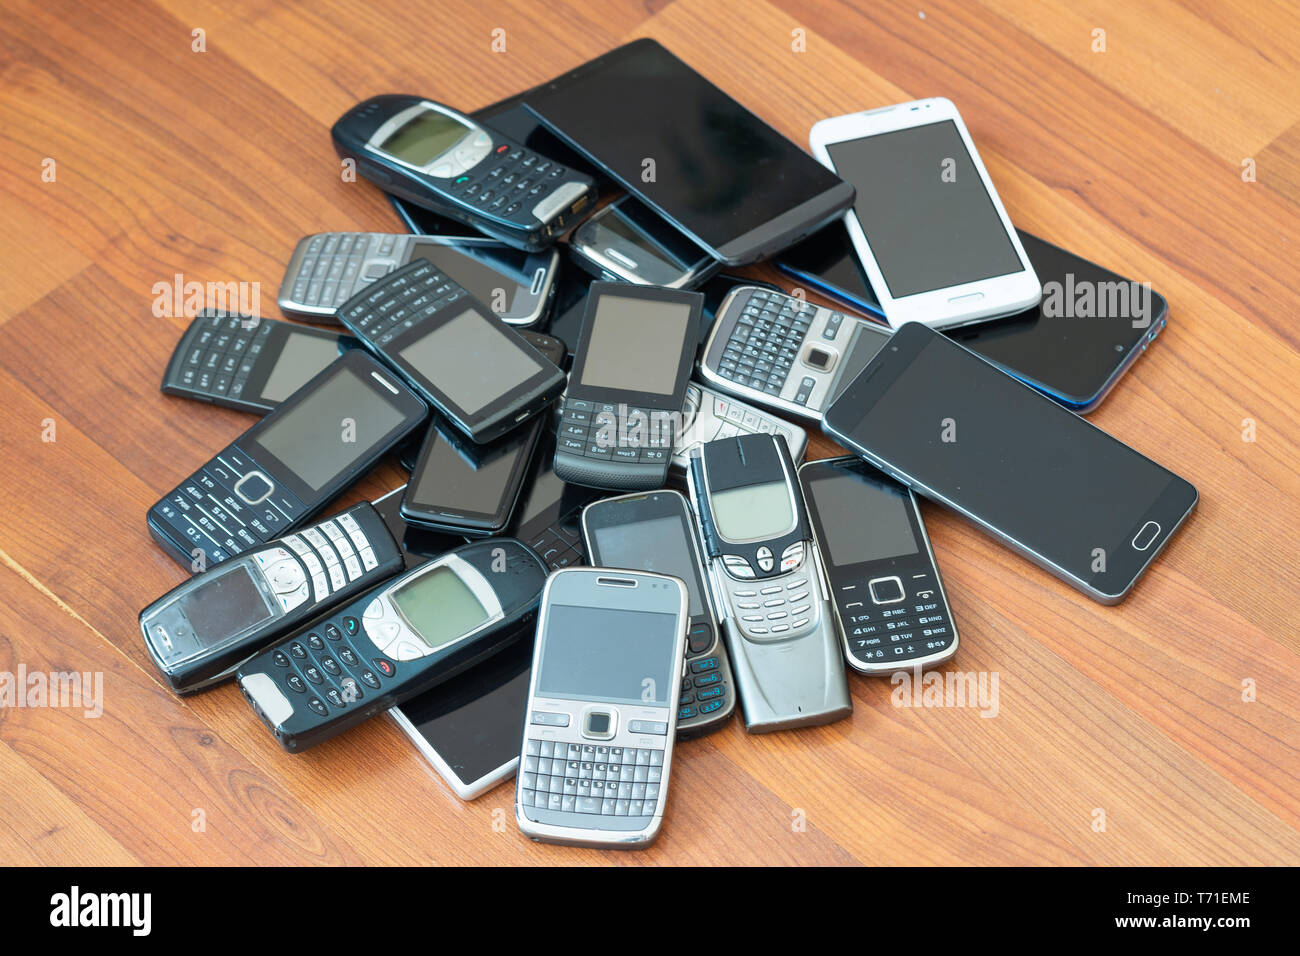 Pile of mobile phones. Old and new models Stock Photo